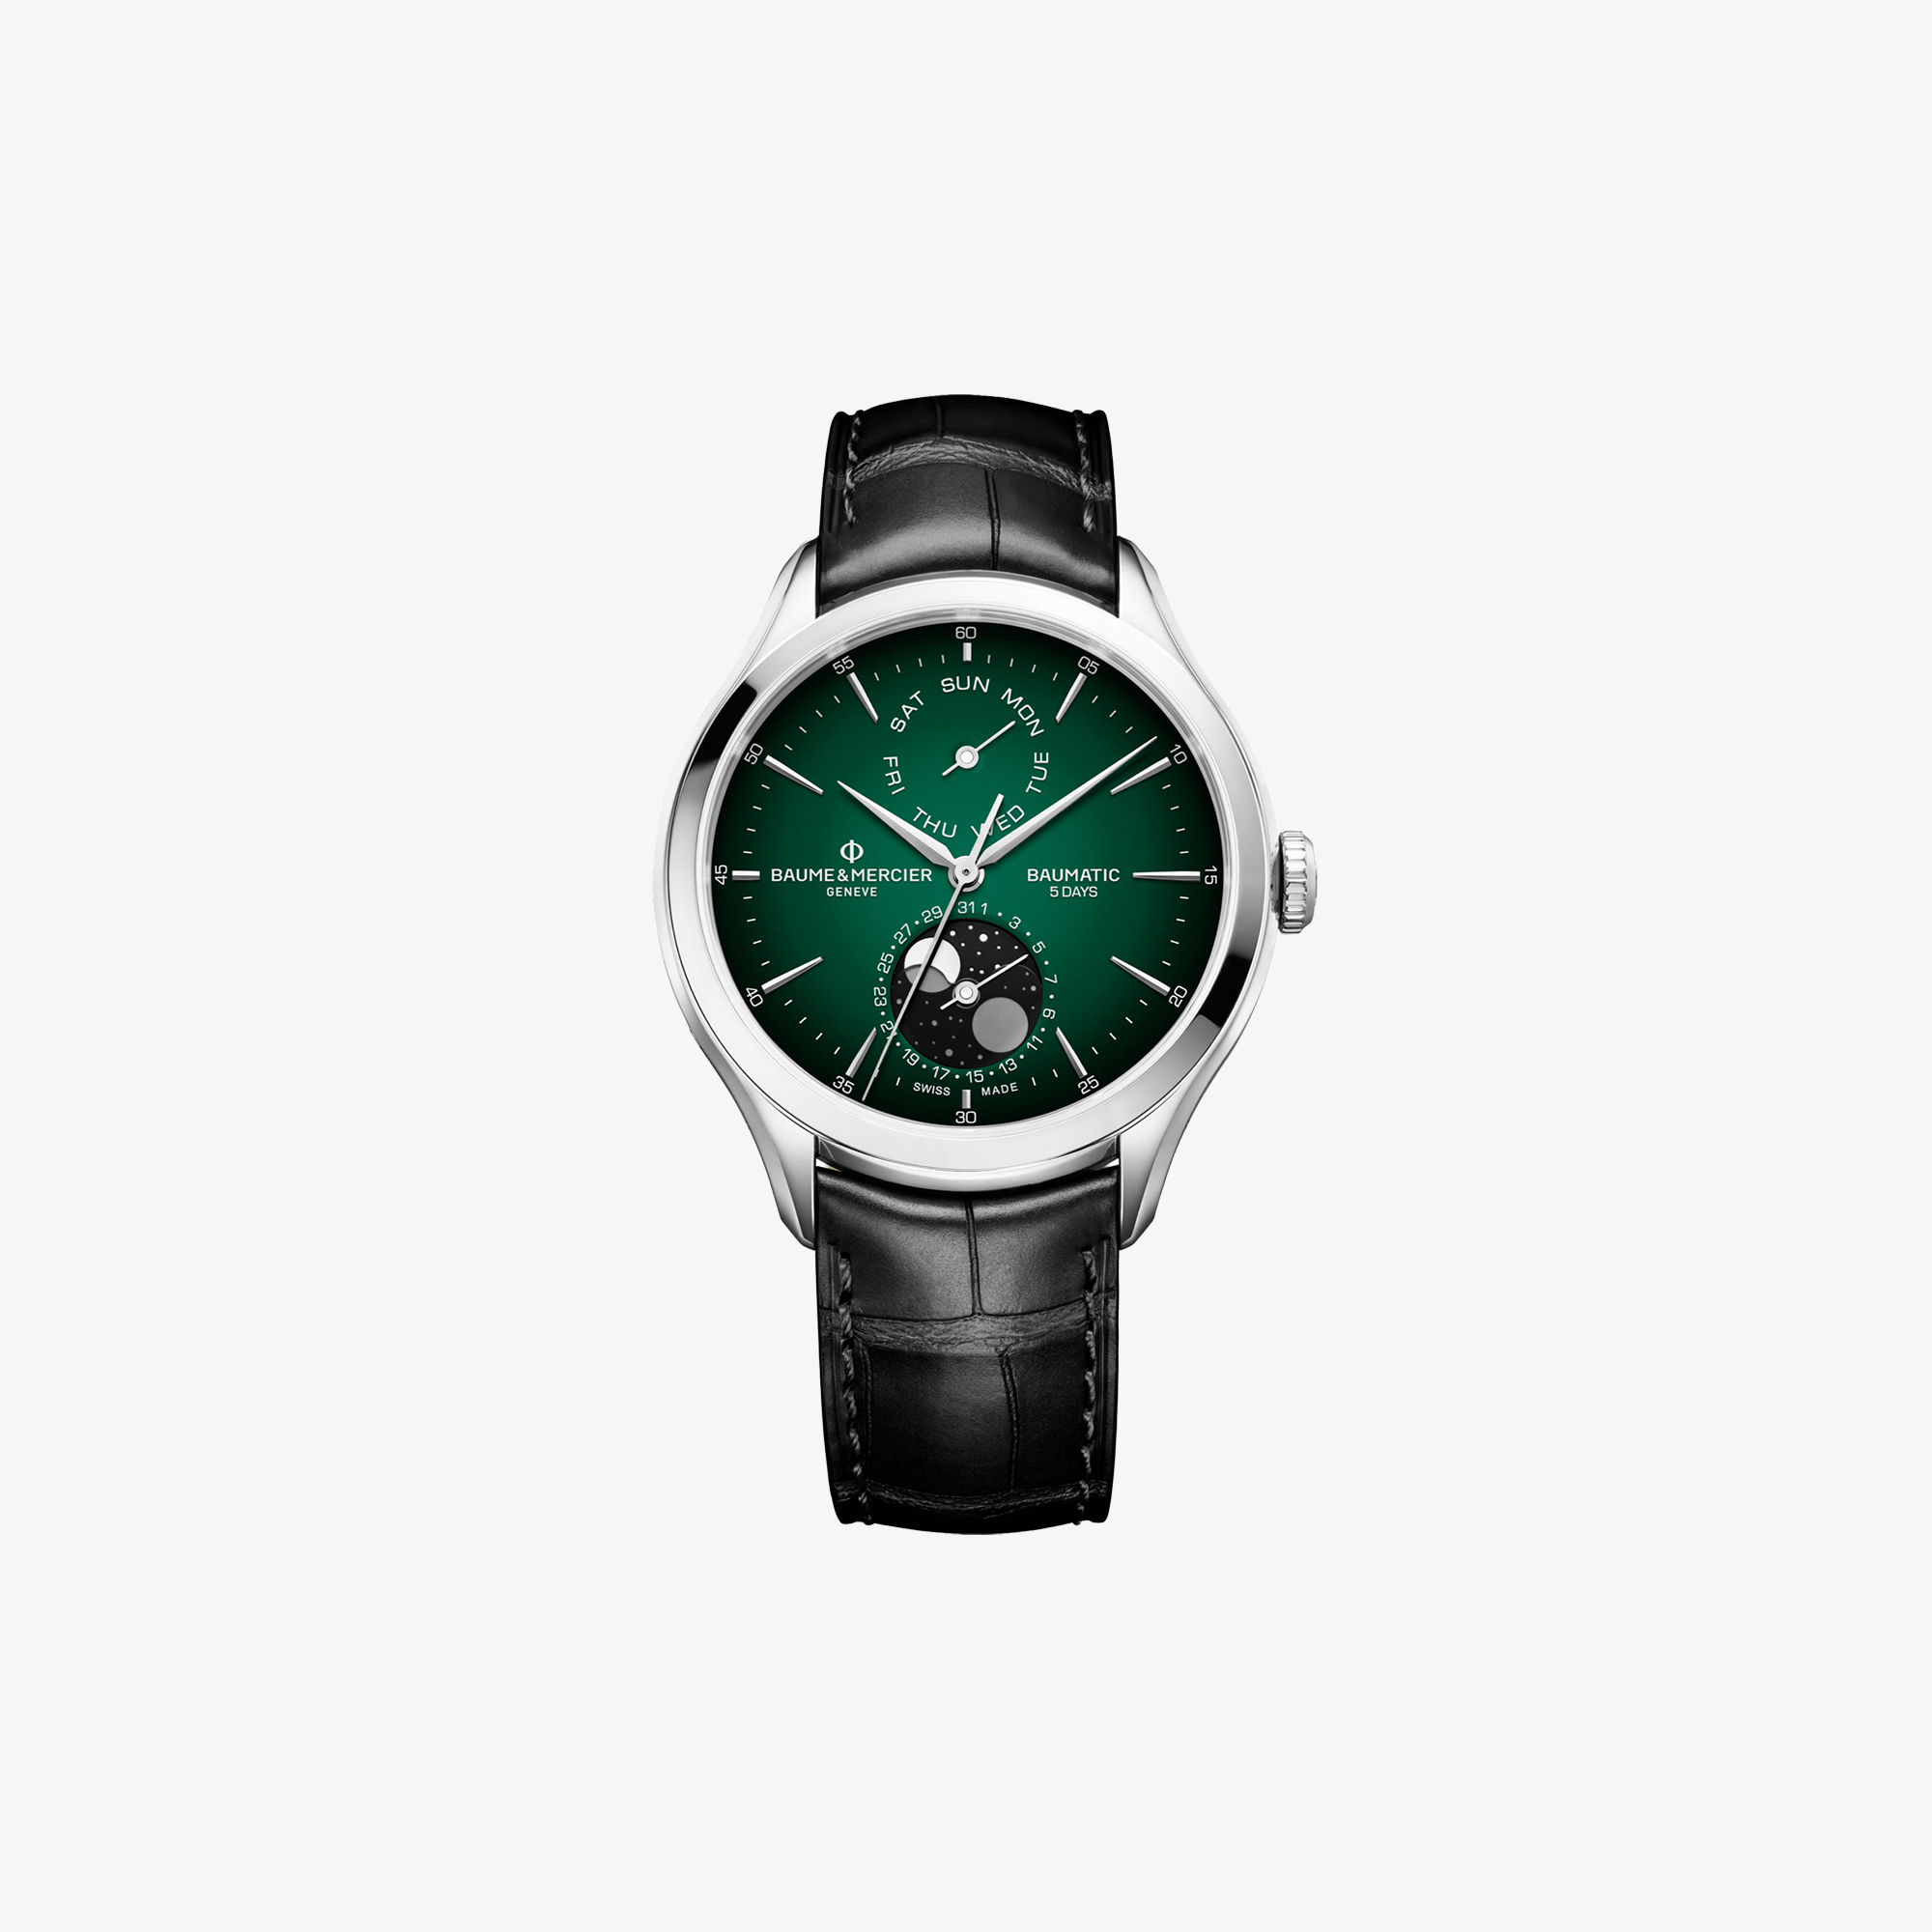 BEAUME ET MERCIER CLIFTON BAUMATIC AUTOMATIC CHRONOGRAPH WITH GREEN DIAL